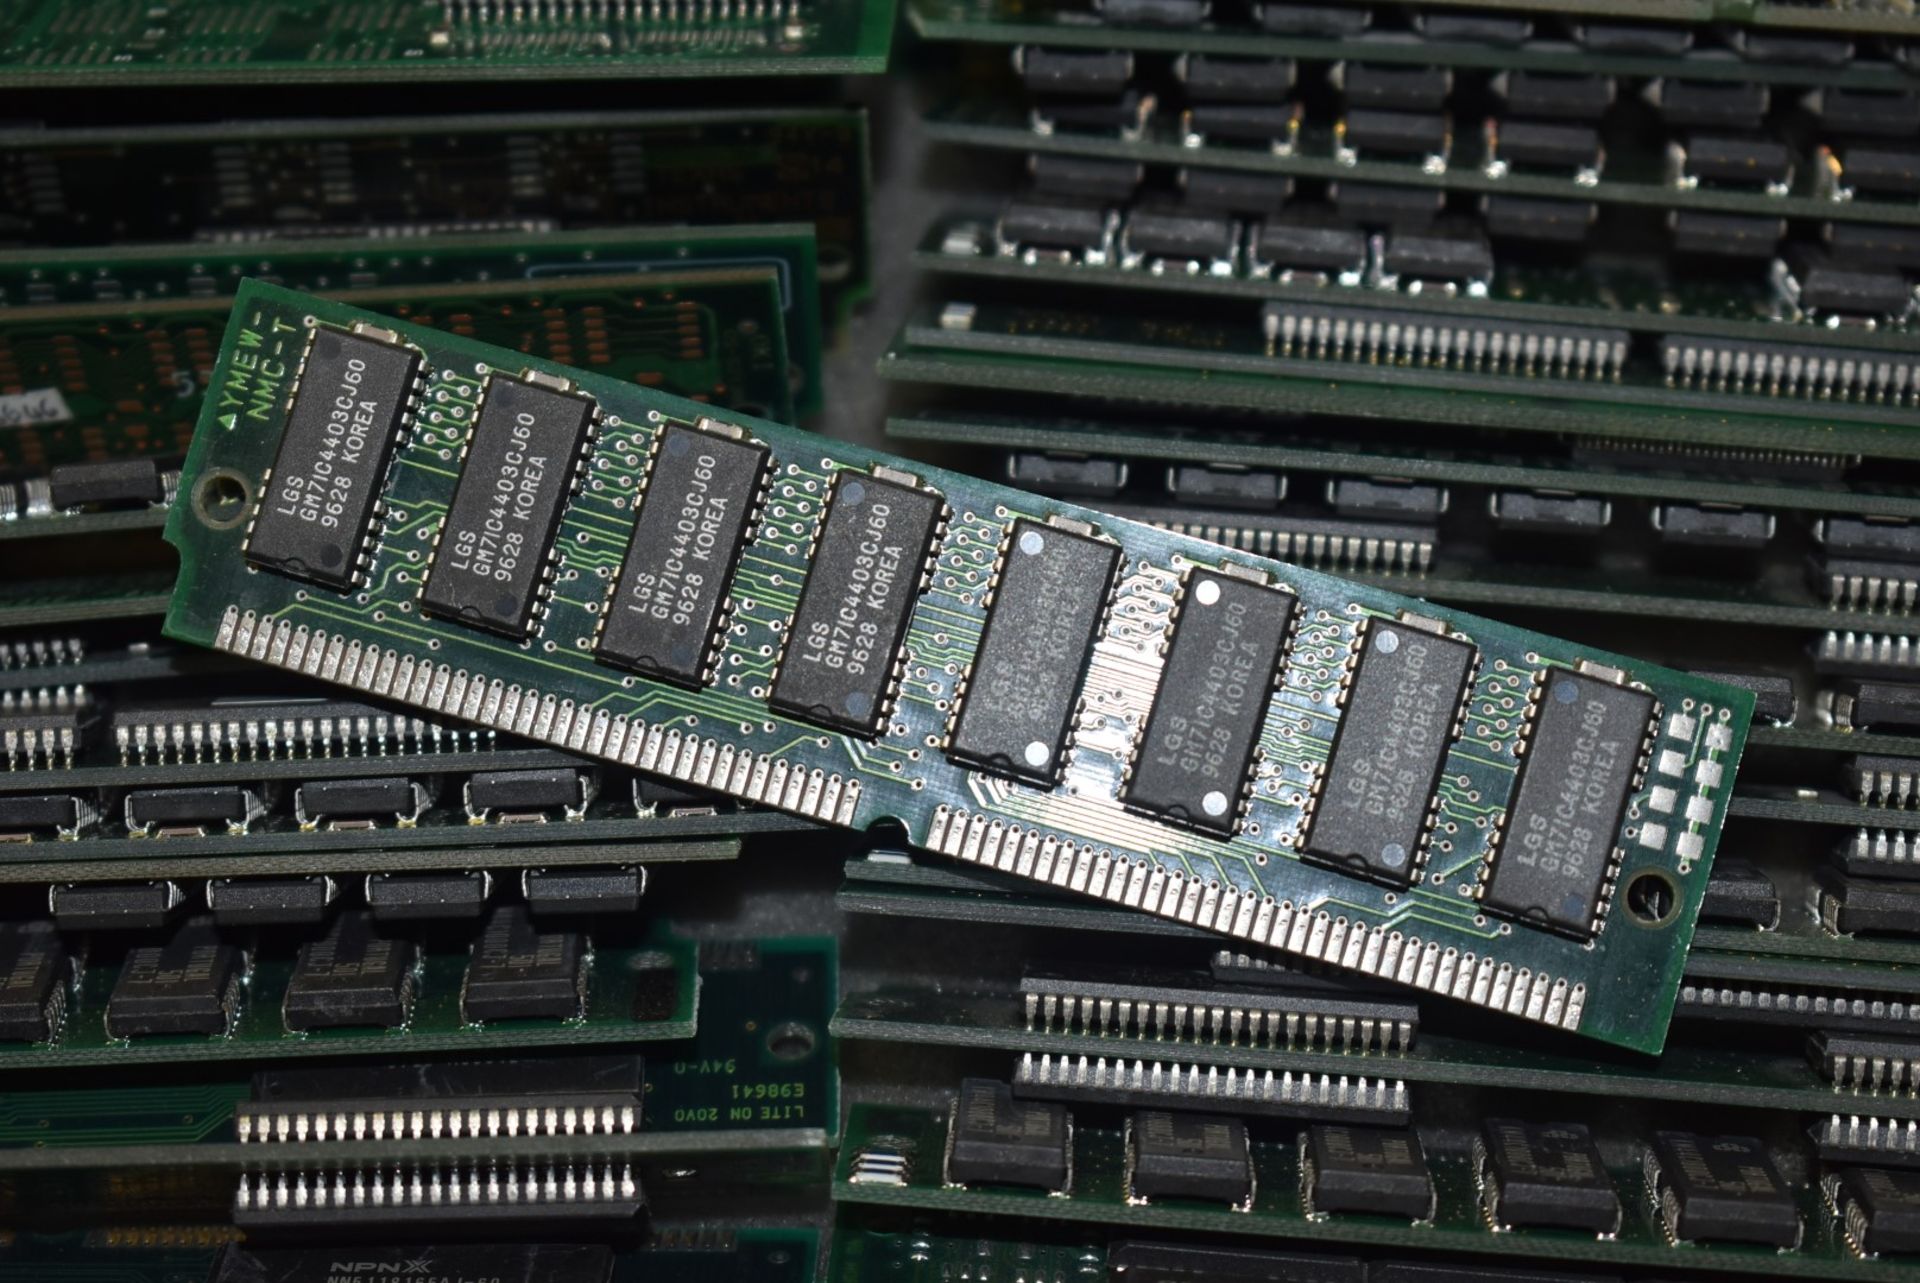 Approx 50 x Pieces of EDO Memory Modules - Ideal For Vintage Computer Enthusiasts - Ref: MPC604 CG - - Image 7 of 11